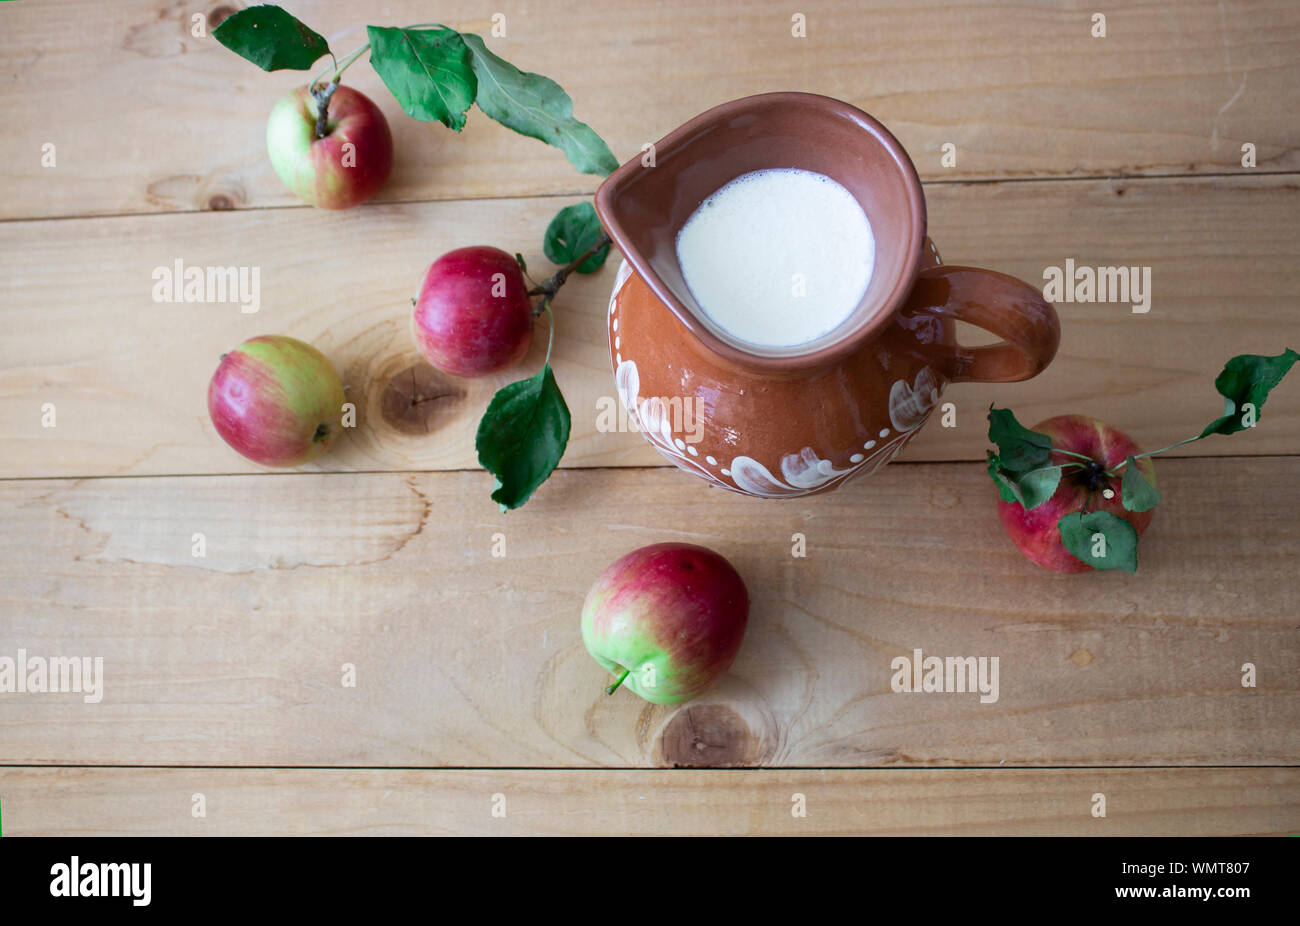 Tasty fresh milk is one of the main sources of nutrition. Milk and apples rustic food. On a wooden background. View from above. copyspace Stock Photo